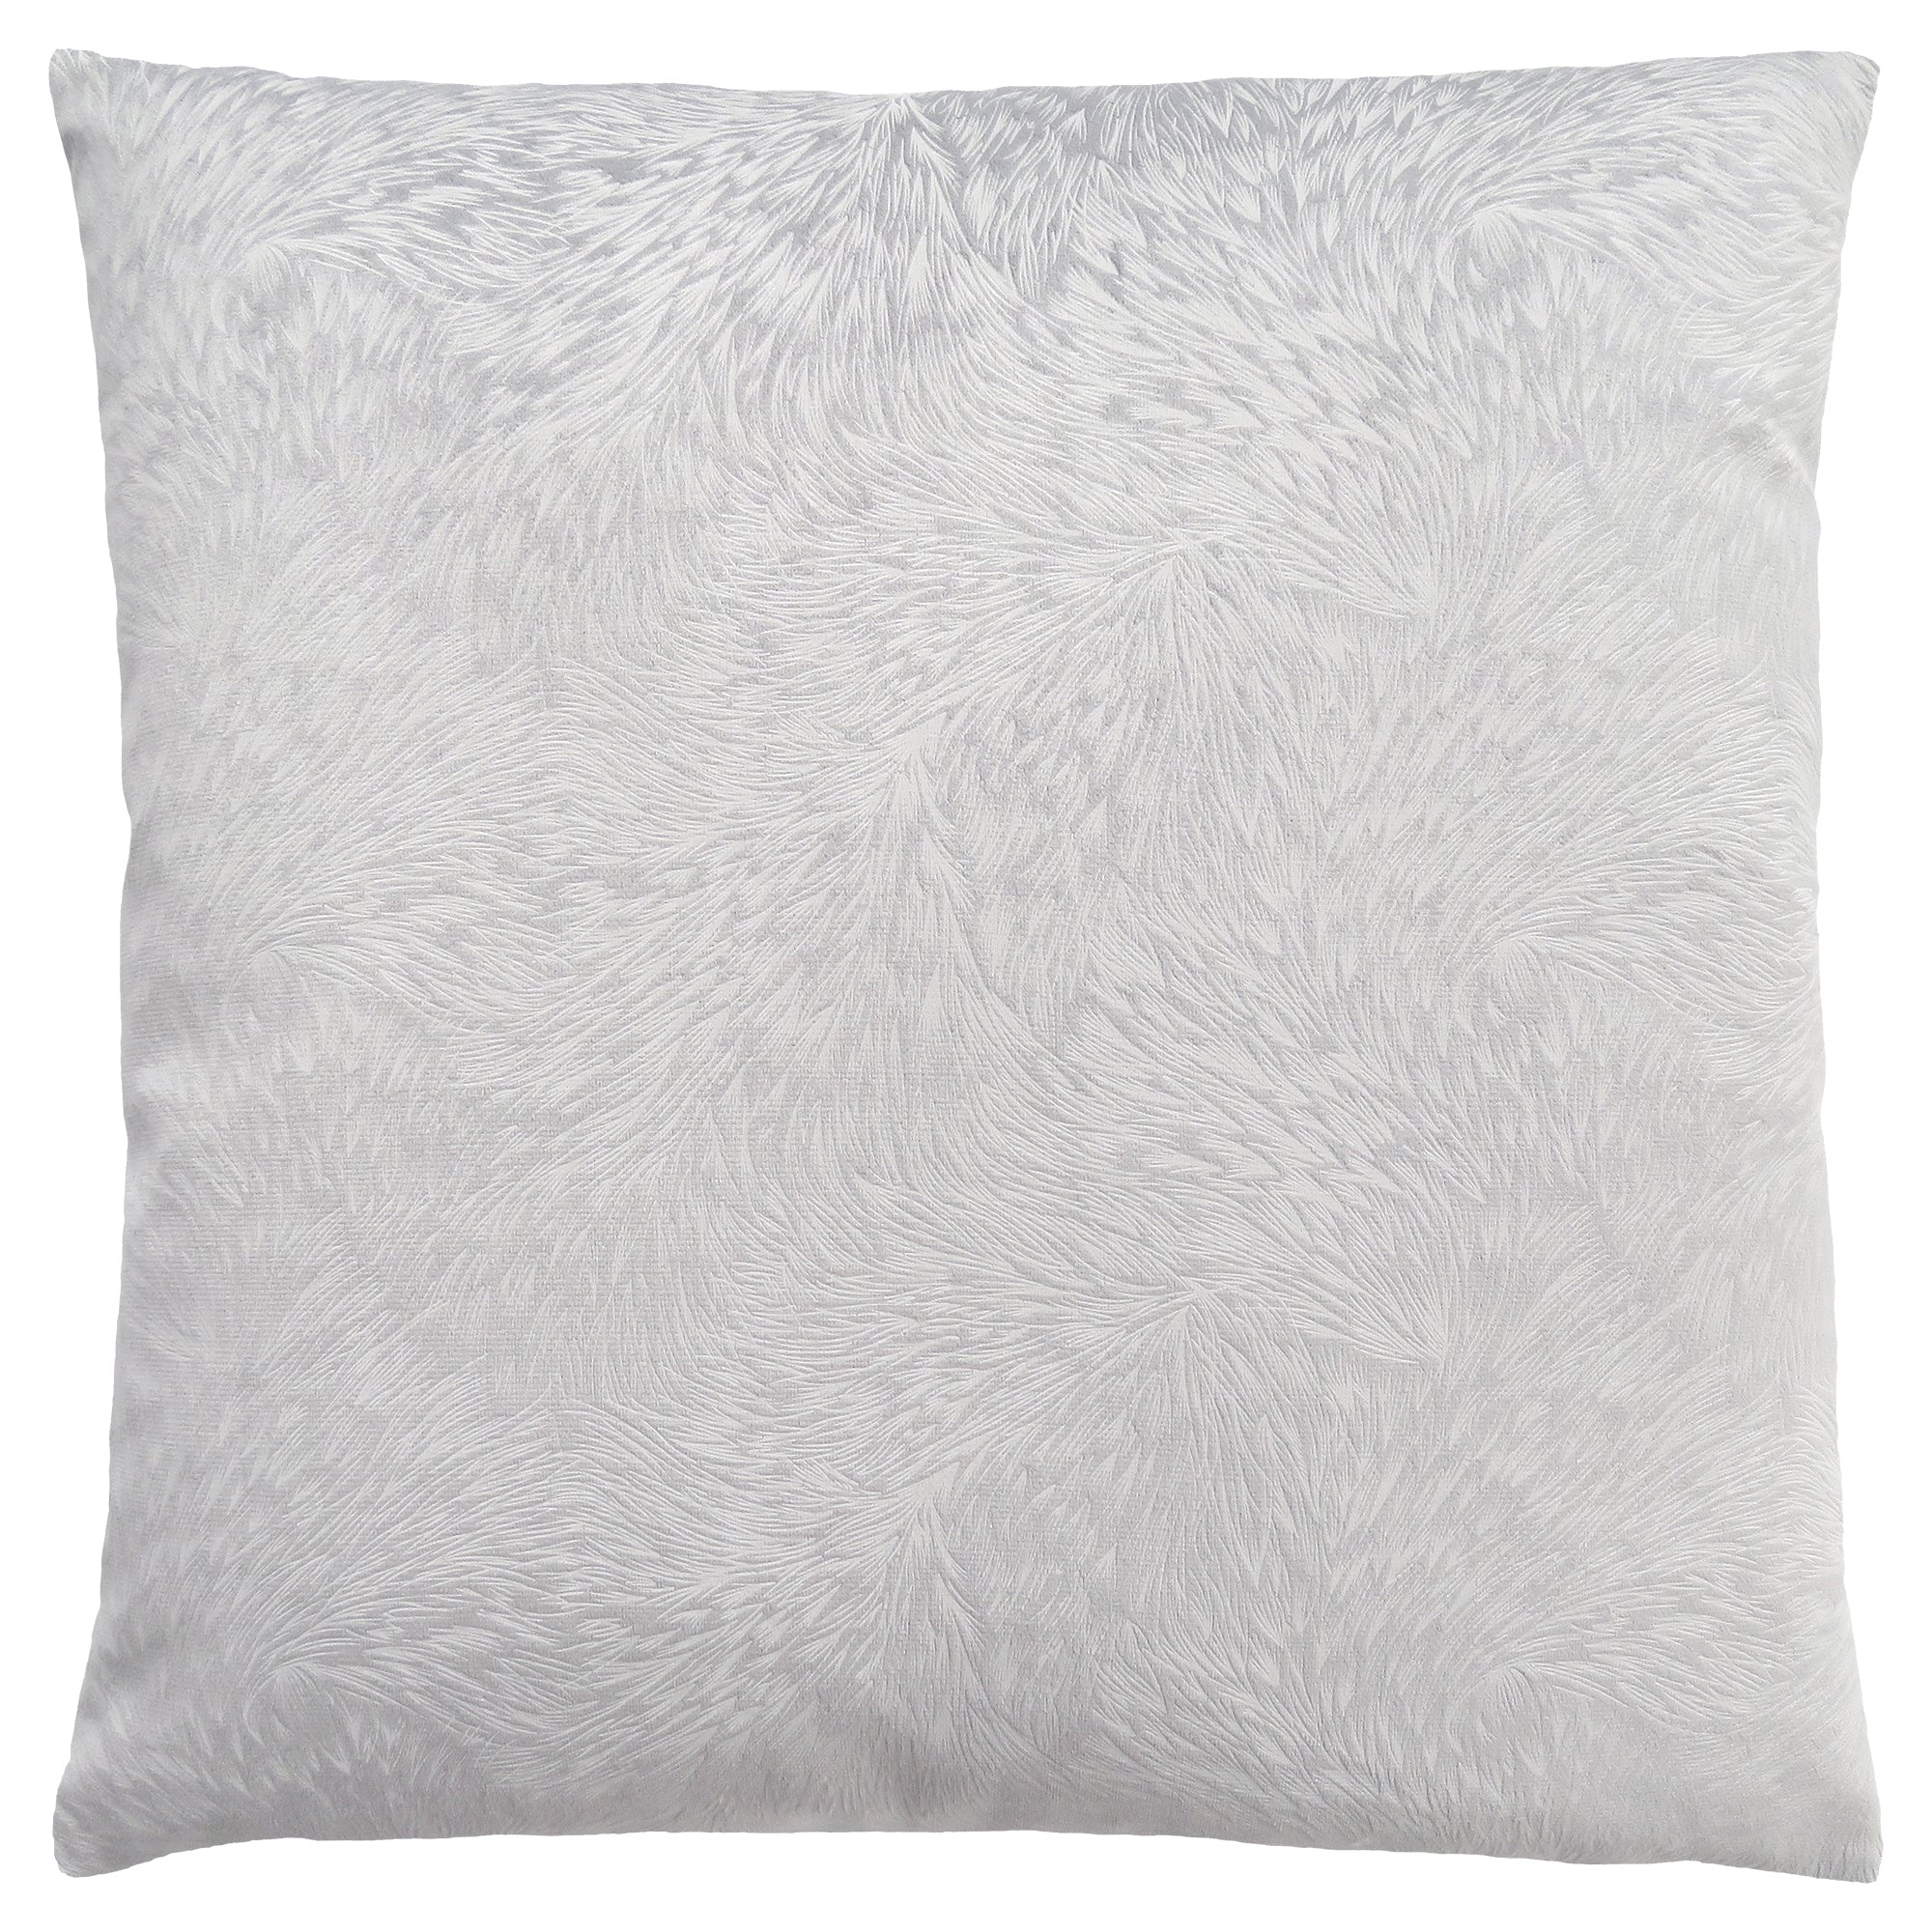 PILLOW - 18"X 18" / LIGHT TAUPE FEATHERED VELVET / 1PC